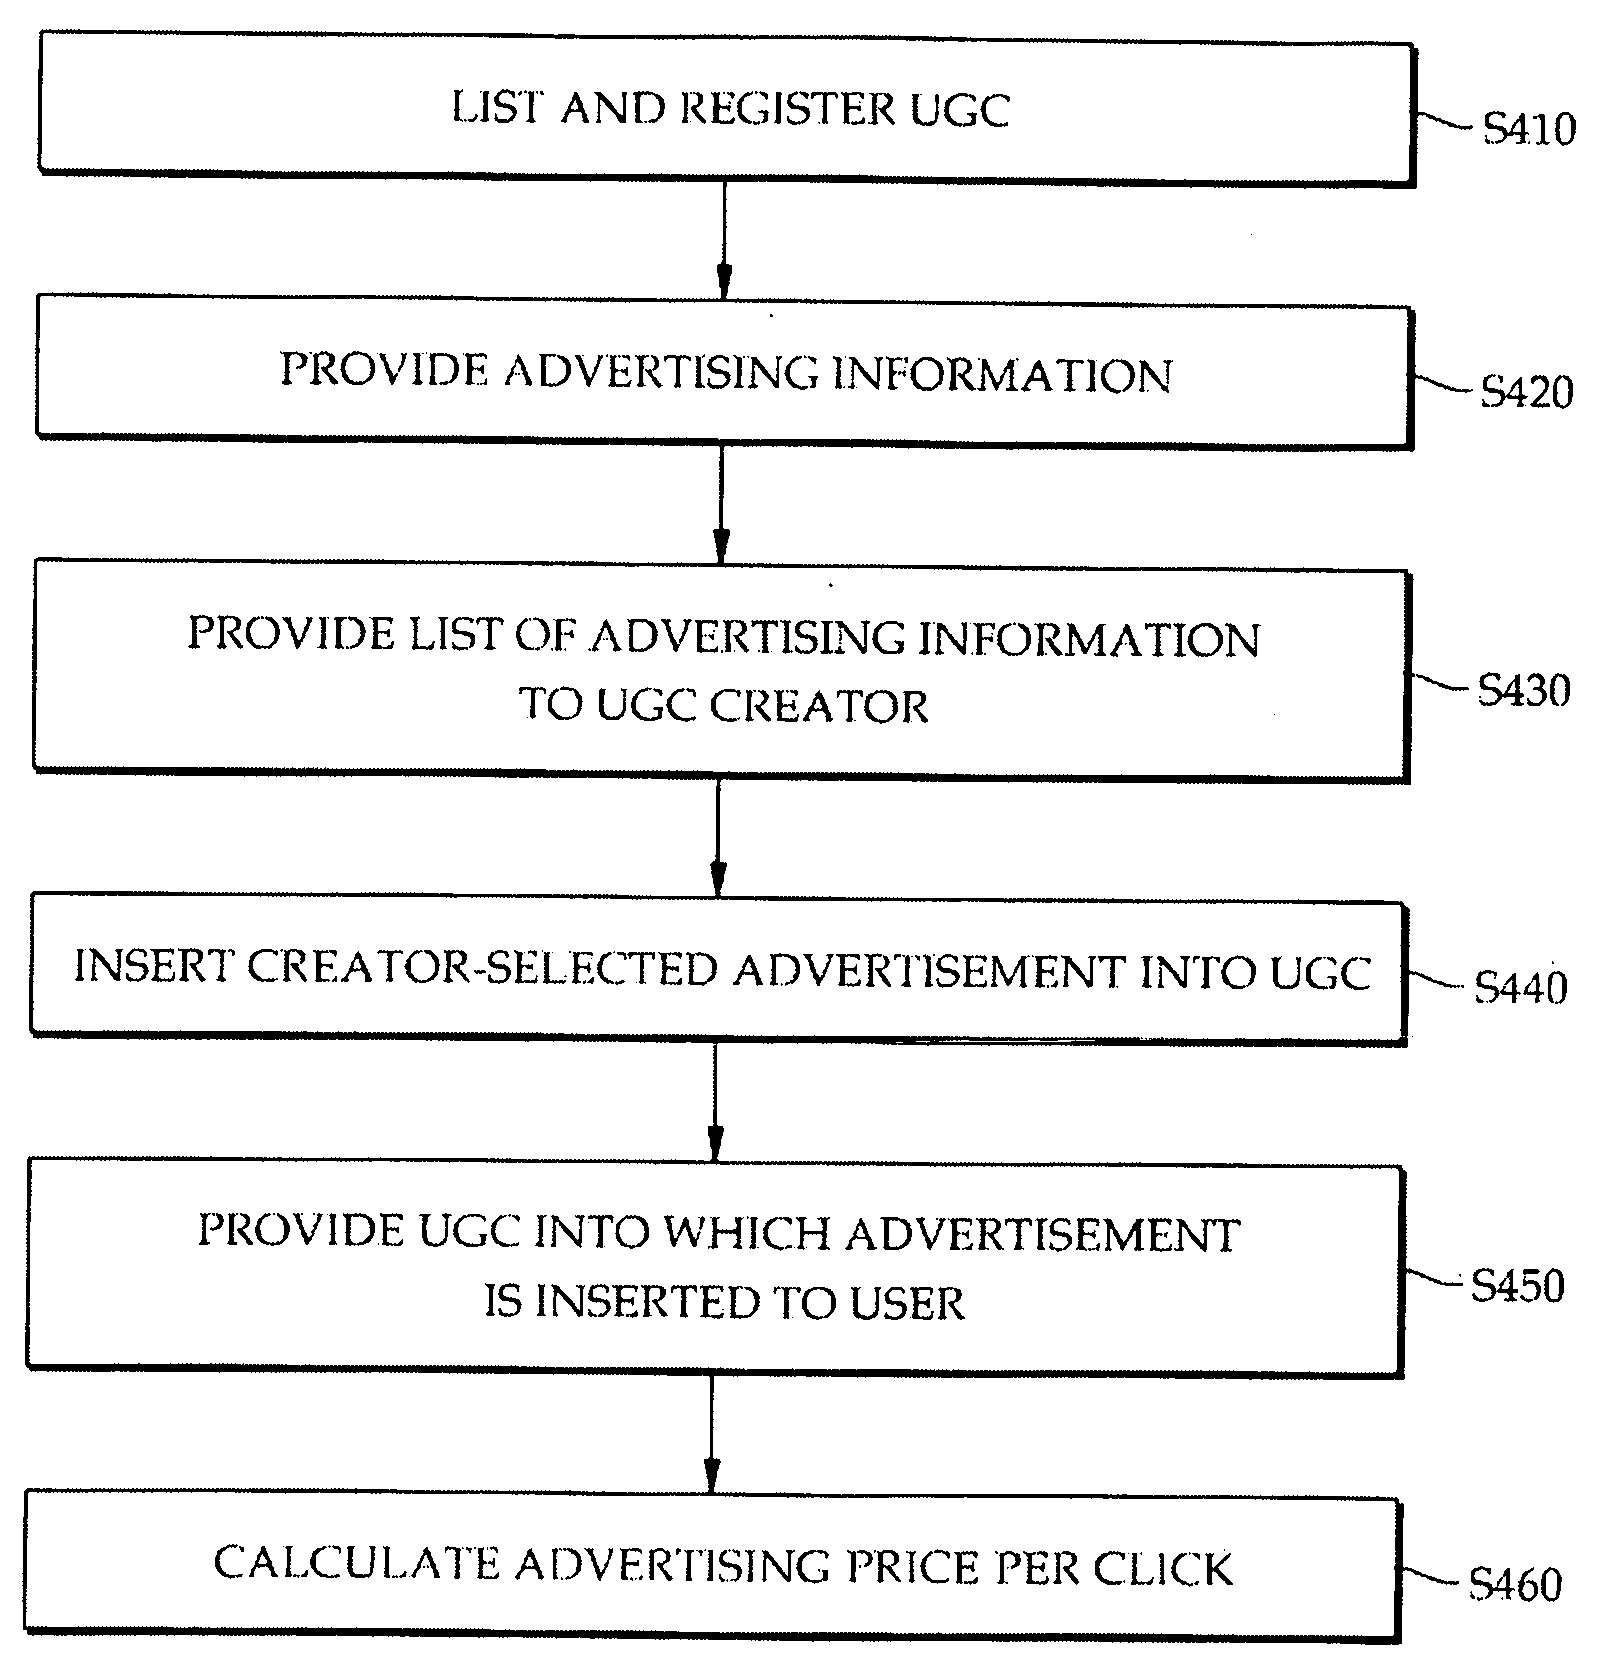 Apparatus and method for providing ugc including advertisement